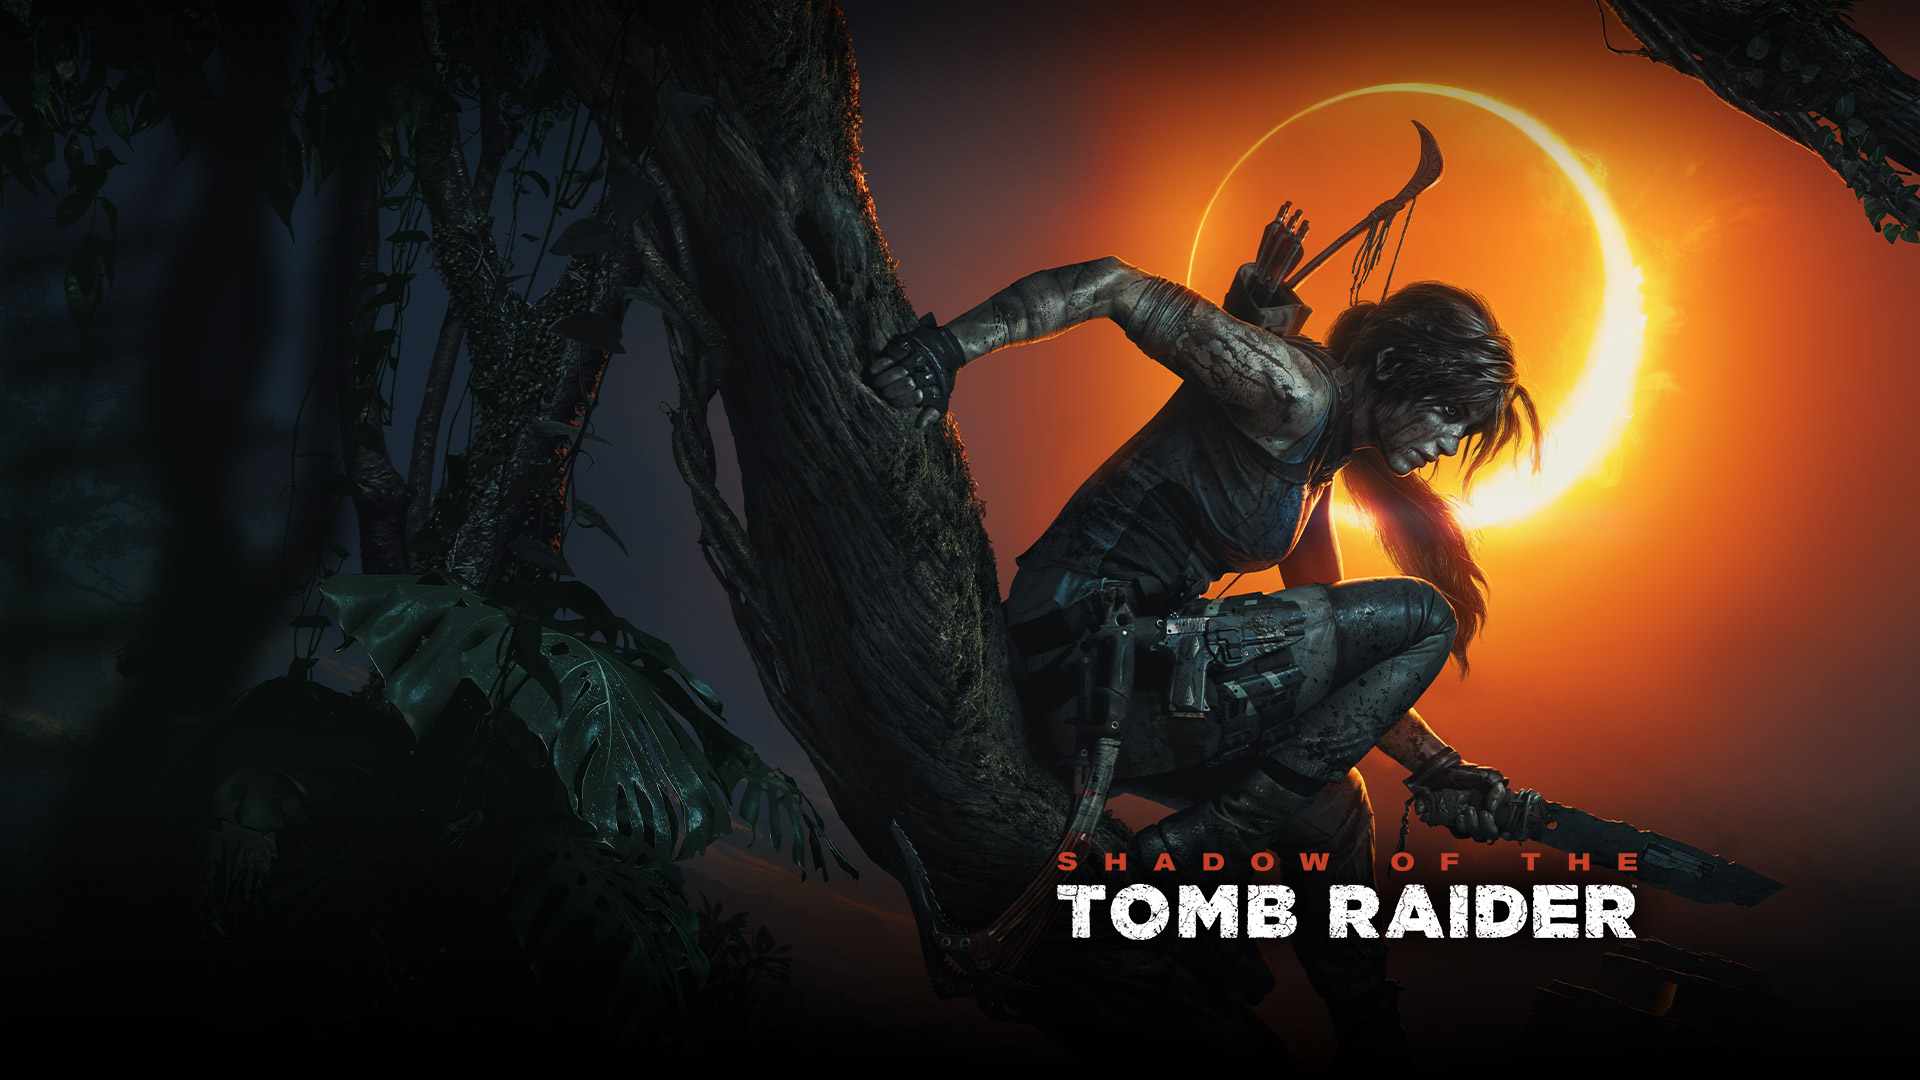 Shadow of the Tomb Raider, Lara Croft sits on a tree branch while holding a knife with an Eclipse in the background